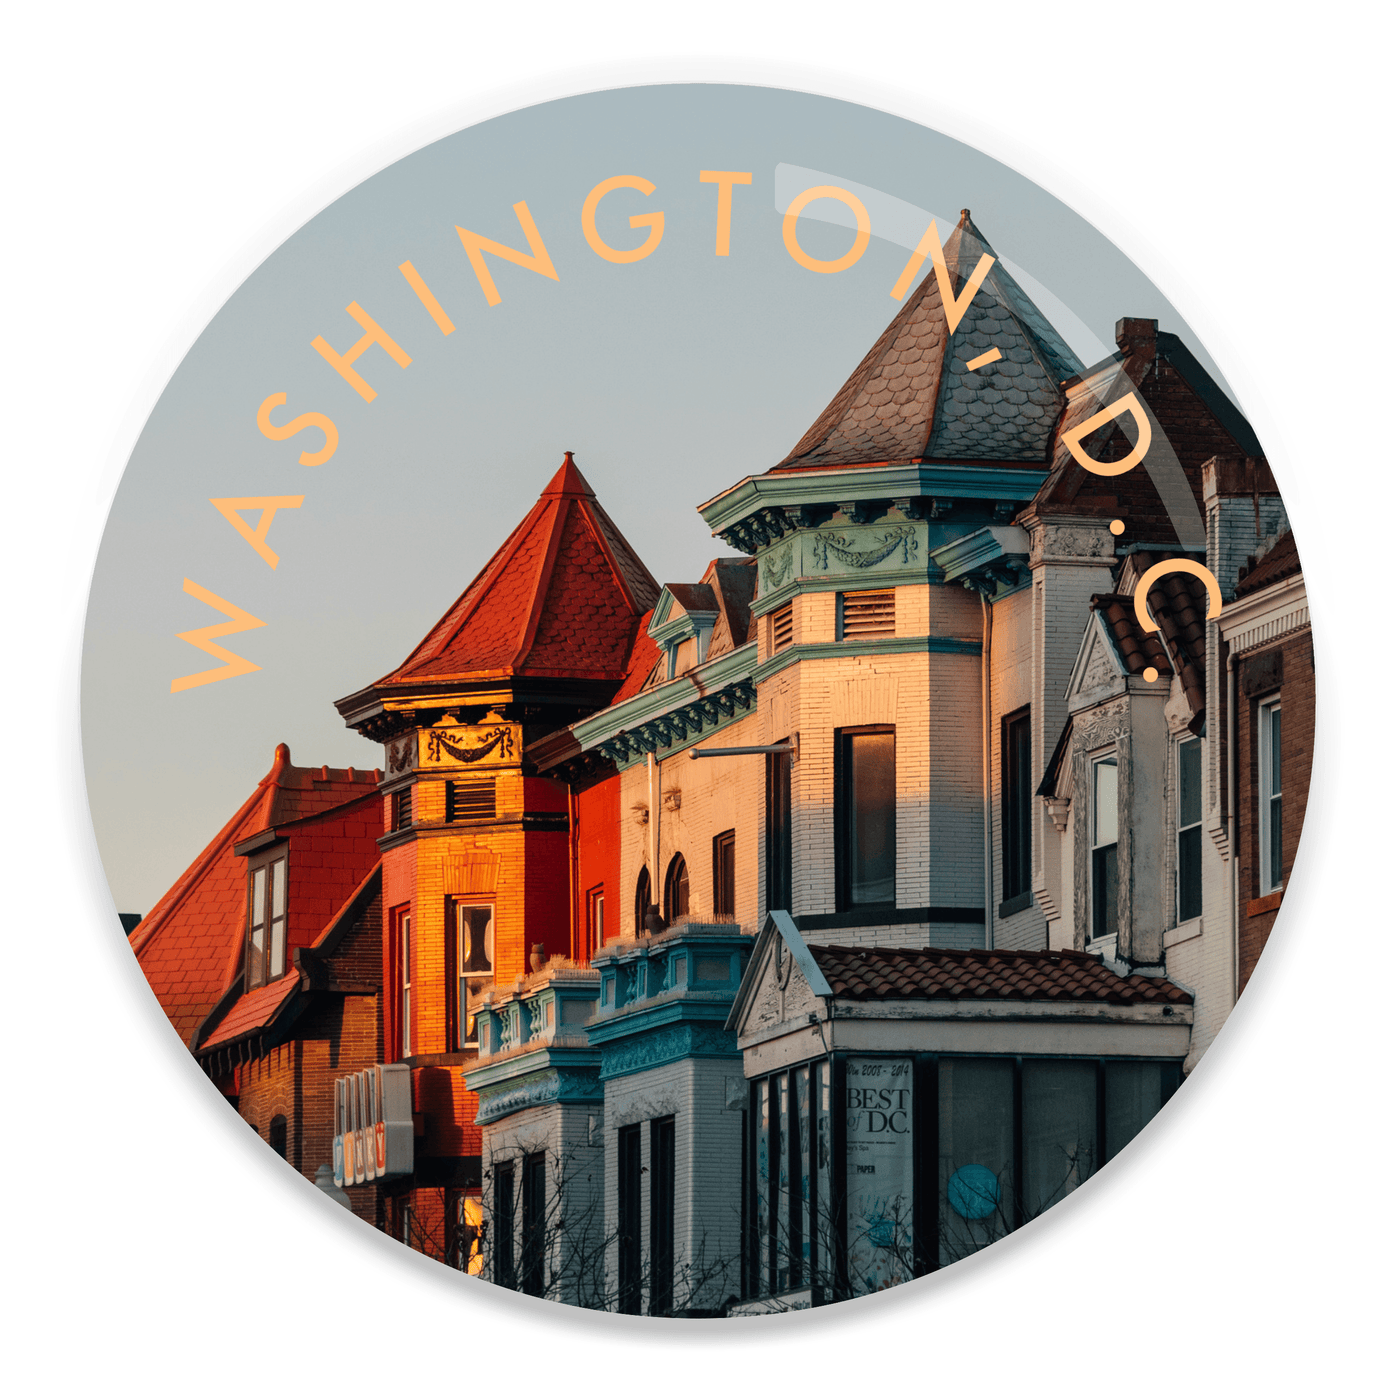 2.25 inch round colorful magnet with image of Washington dc rowhouses